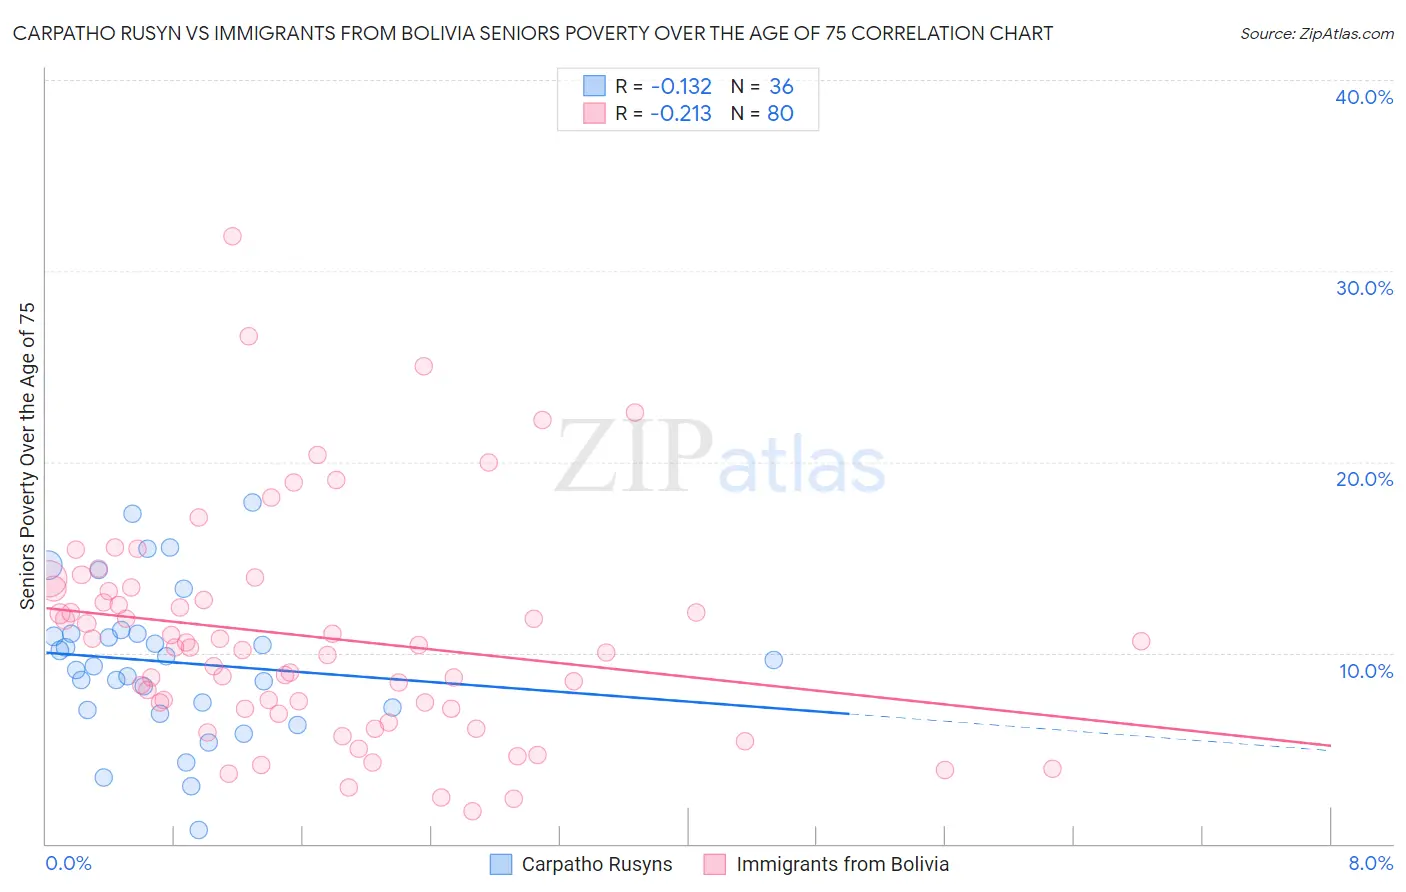 Carpatho Rusyn vs Immigrants from Bolivia Seniors Poverty Over the Age of 75